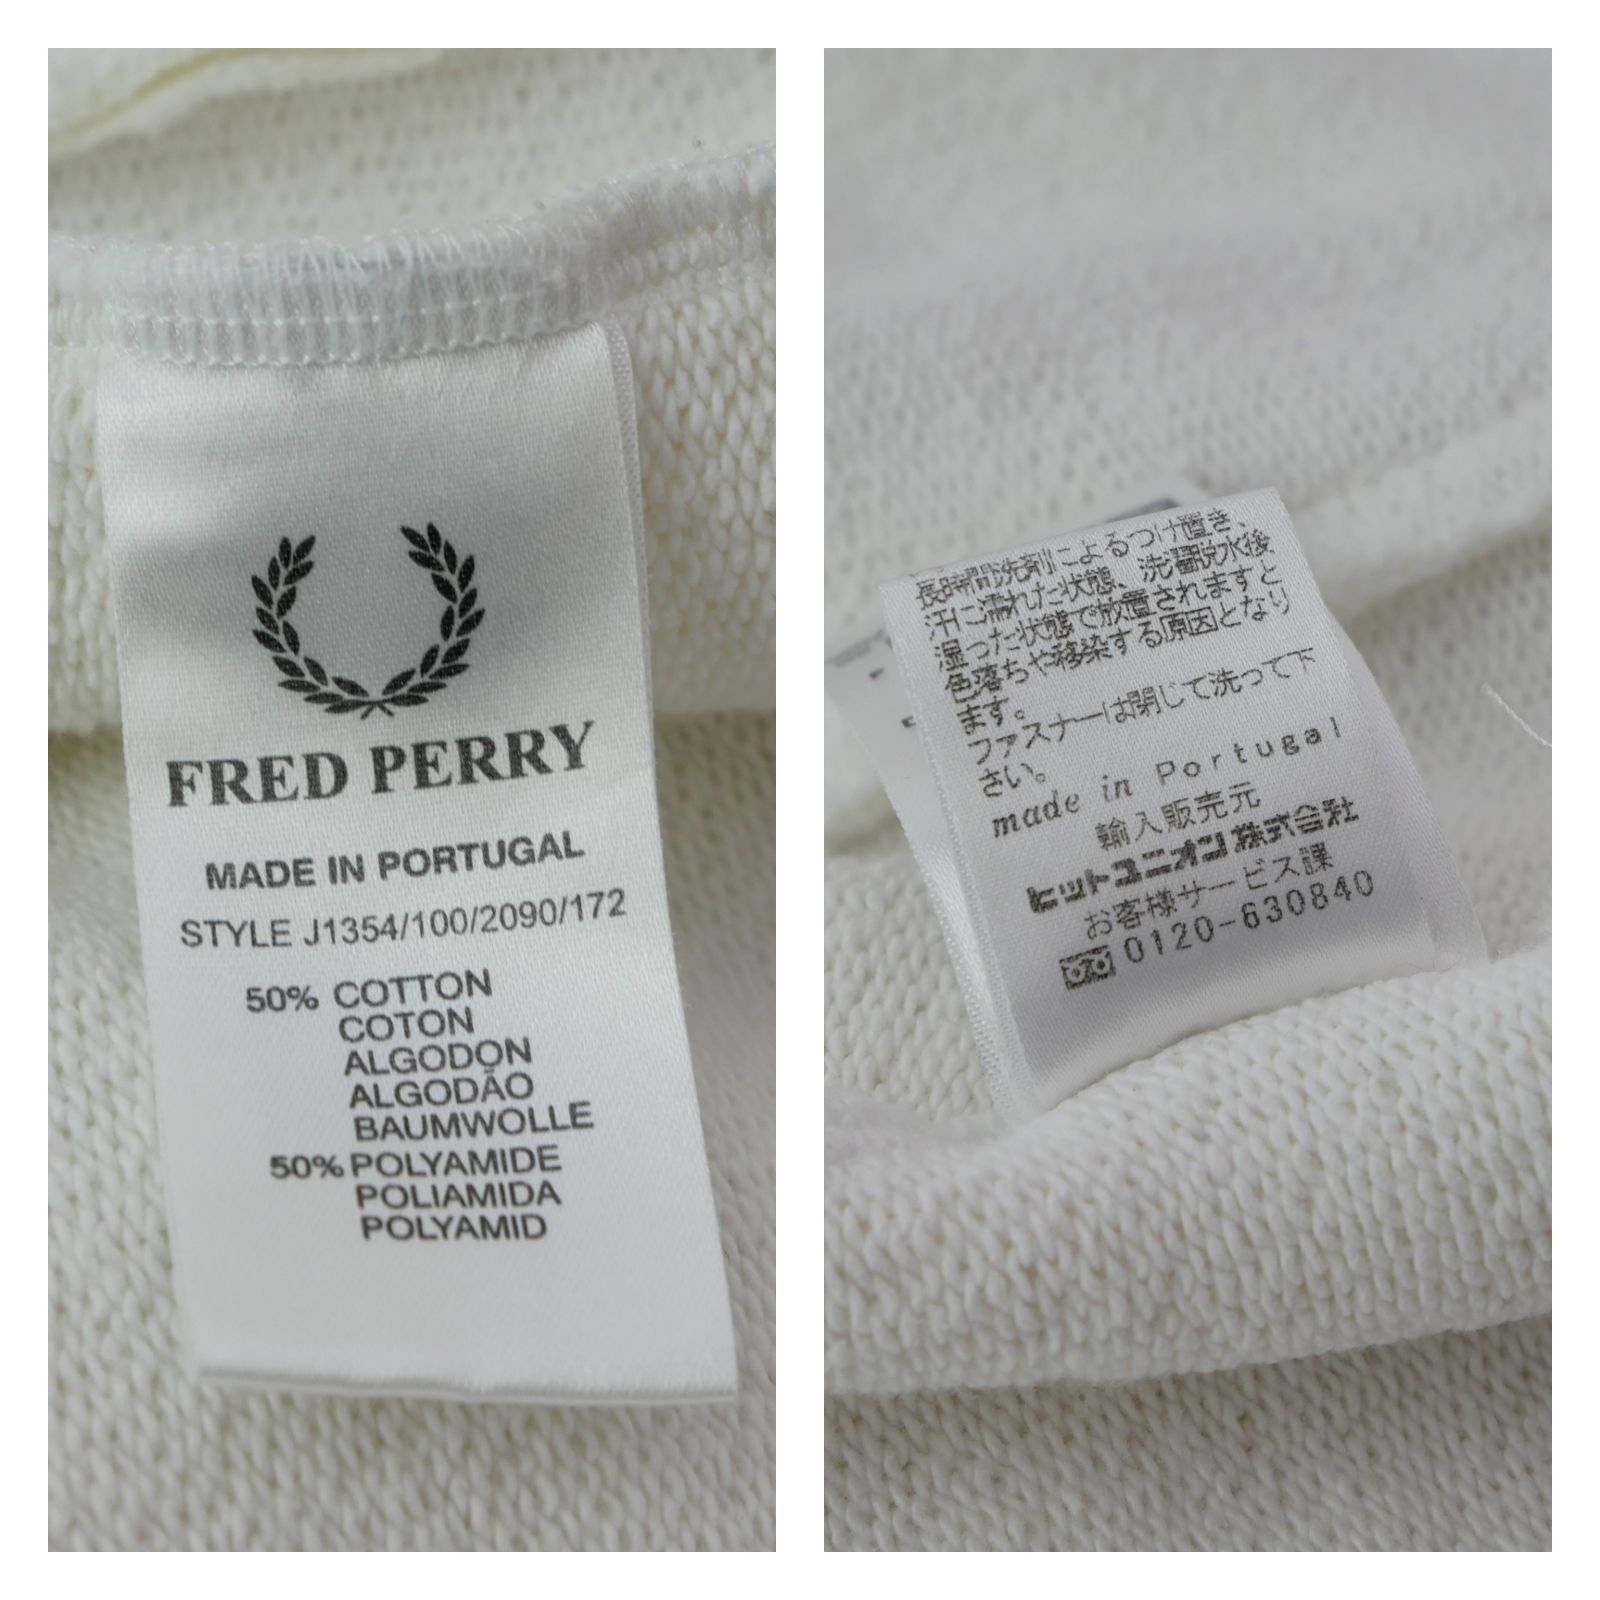 FRED PERRY OFF-WHITEカラー King Gnu 新井和輝着用MODEL Track JKT